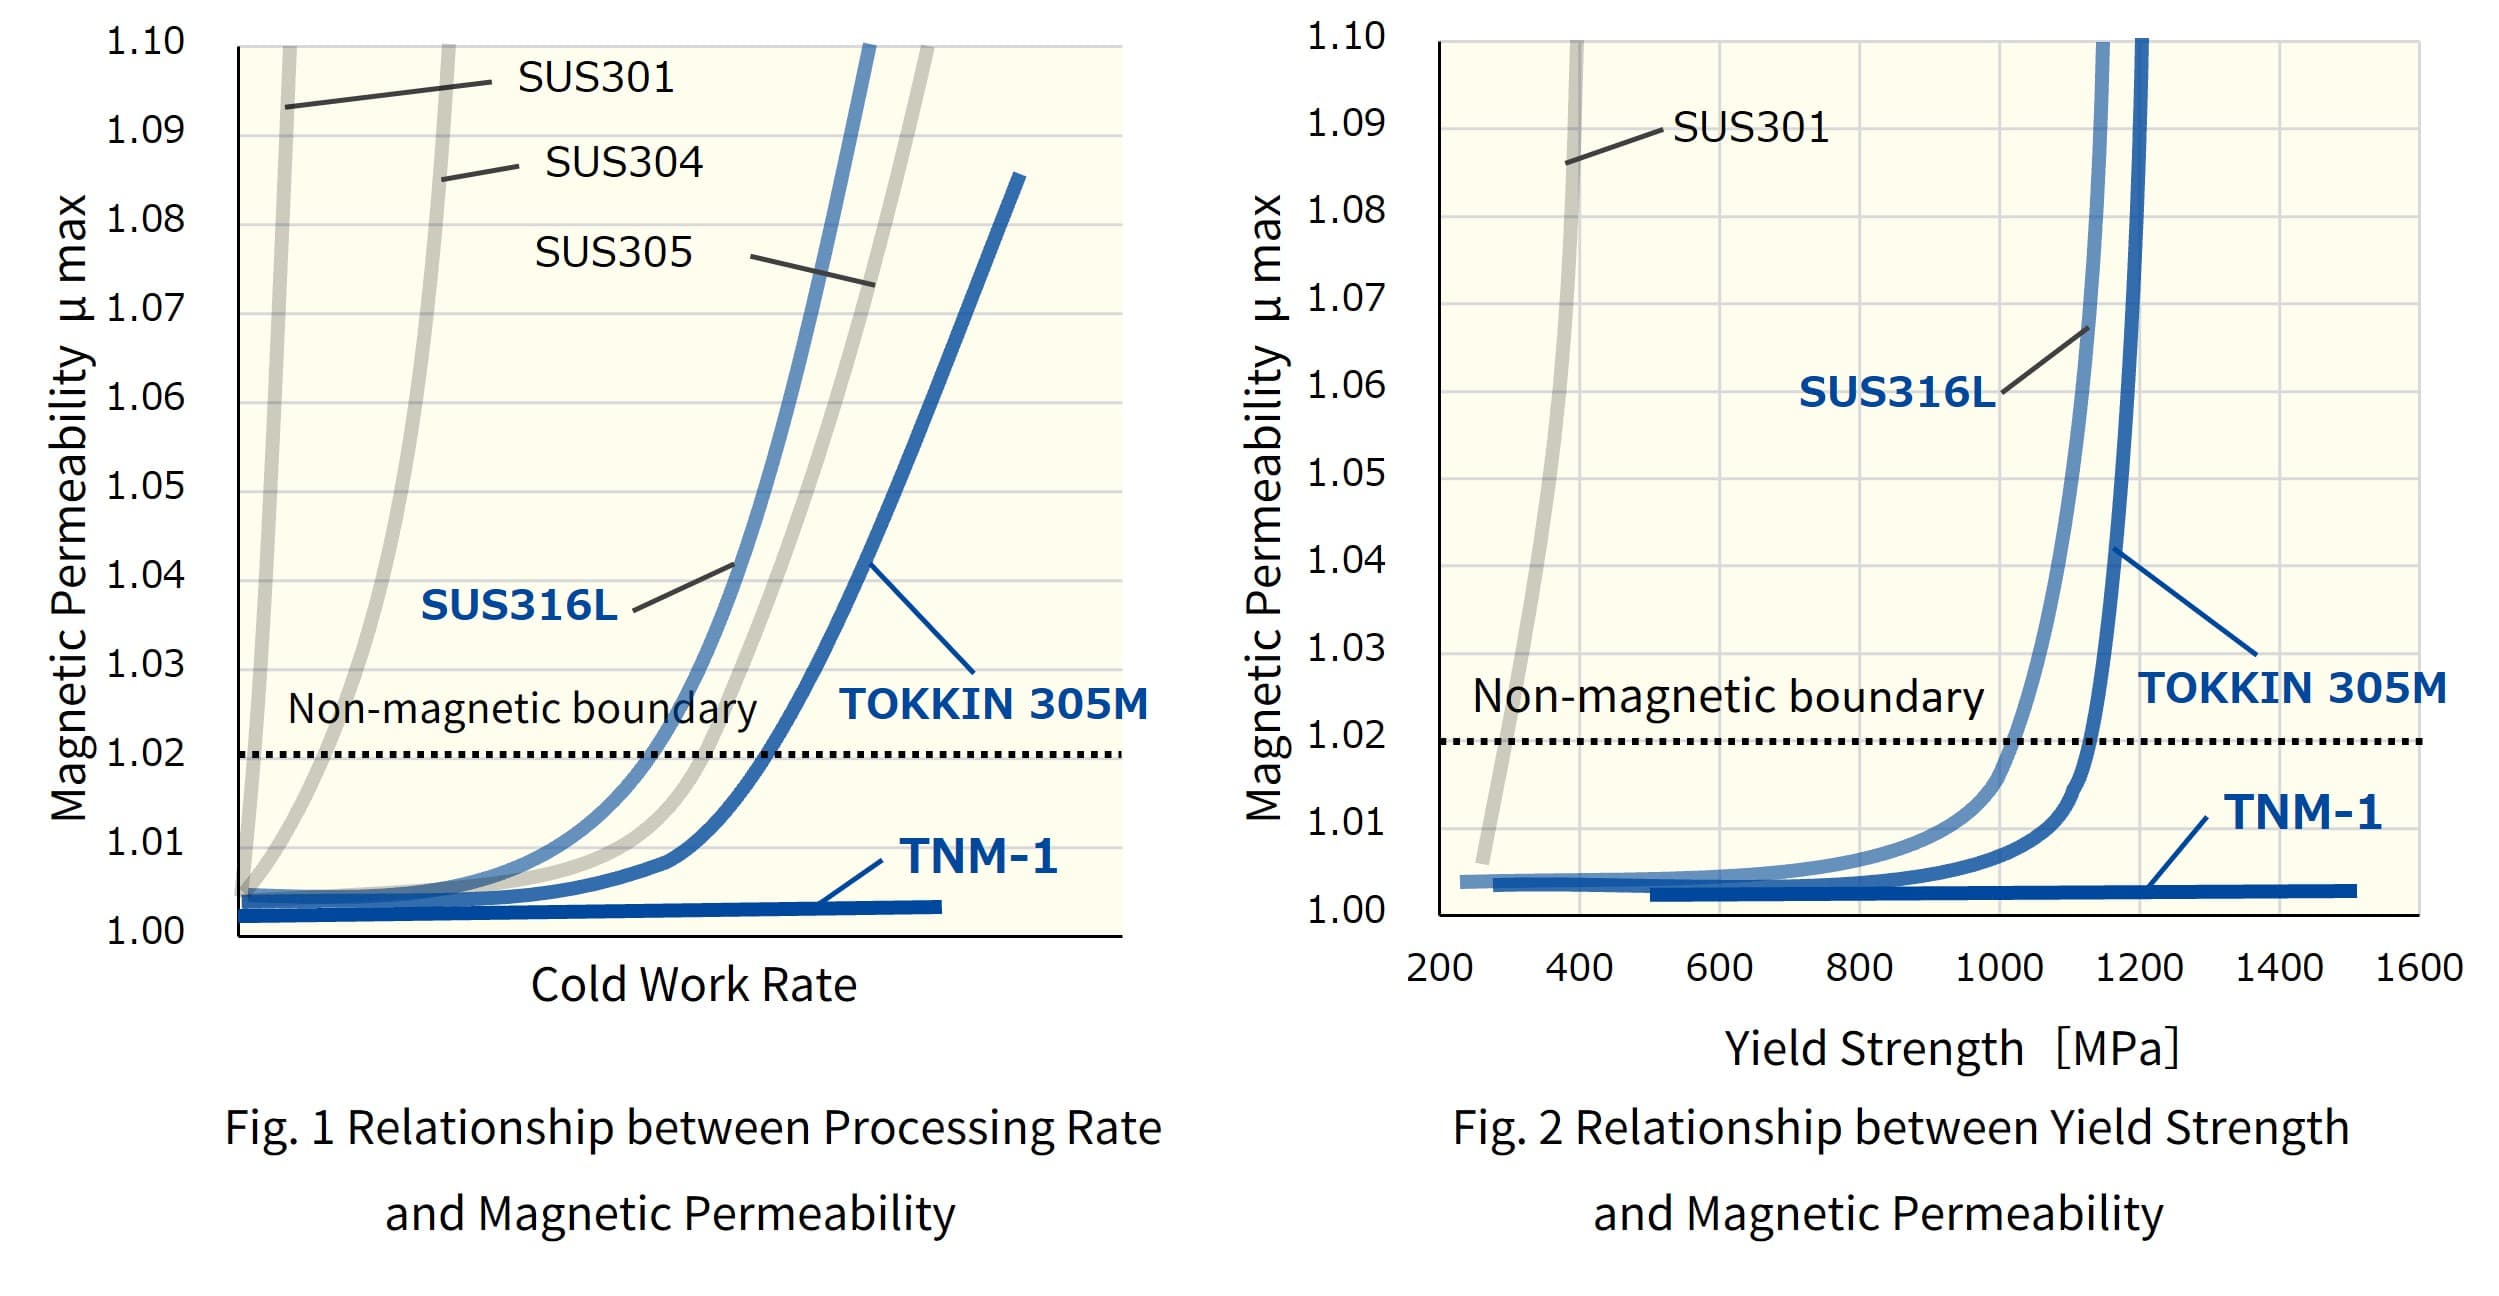 Relationship among Magnetic Permeability, Workability, and Hardness